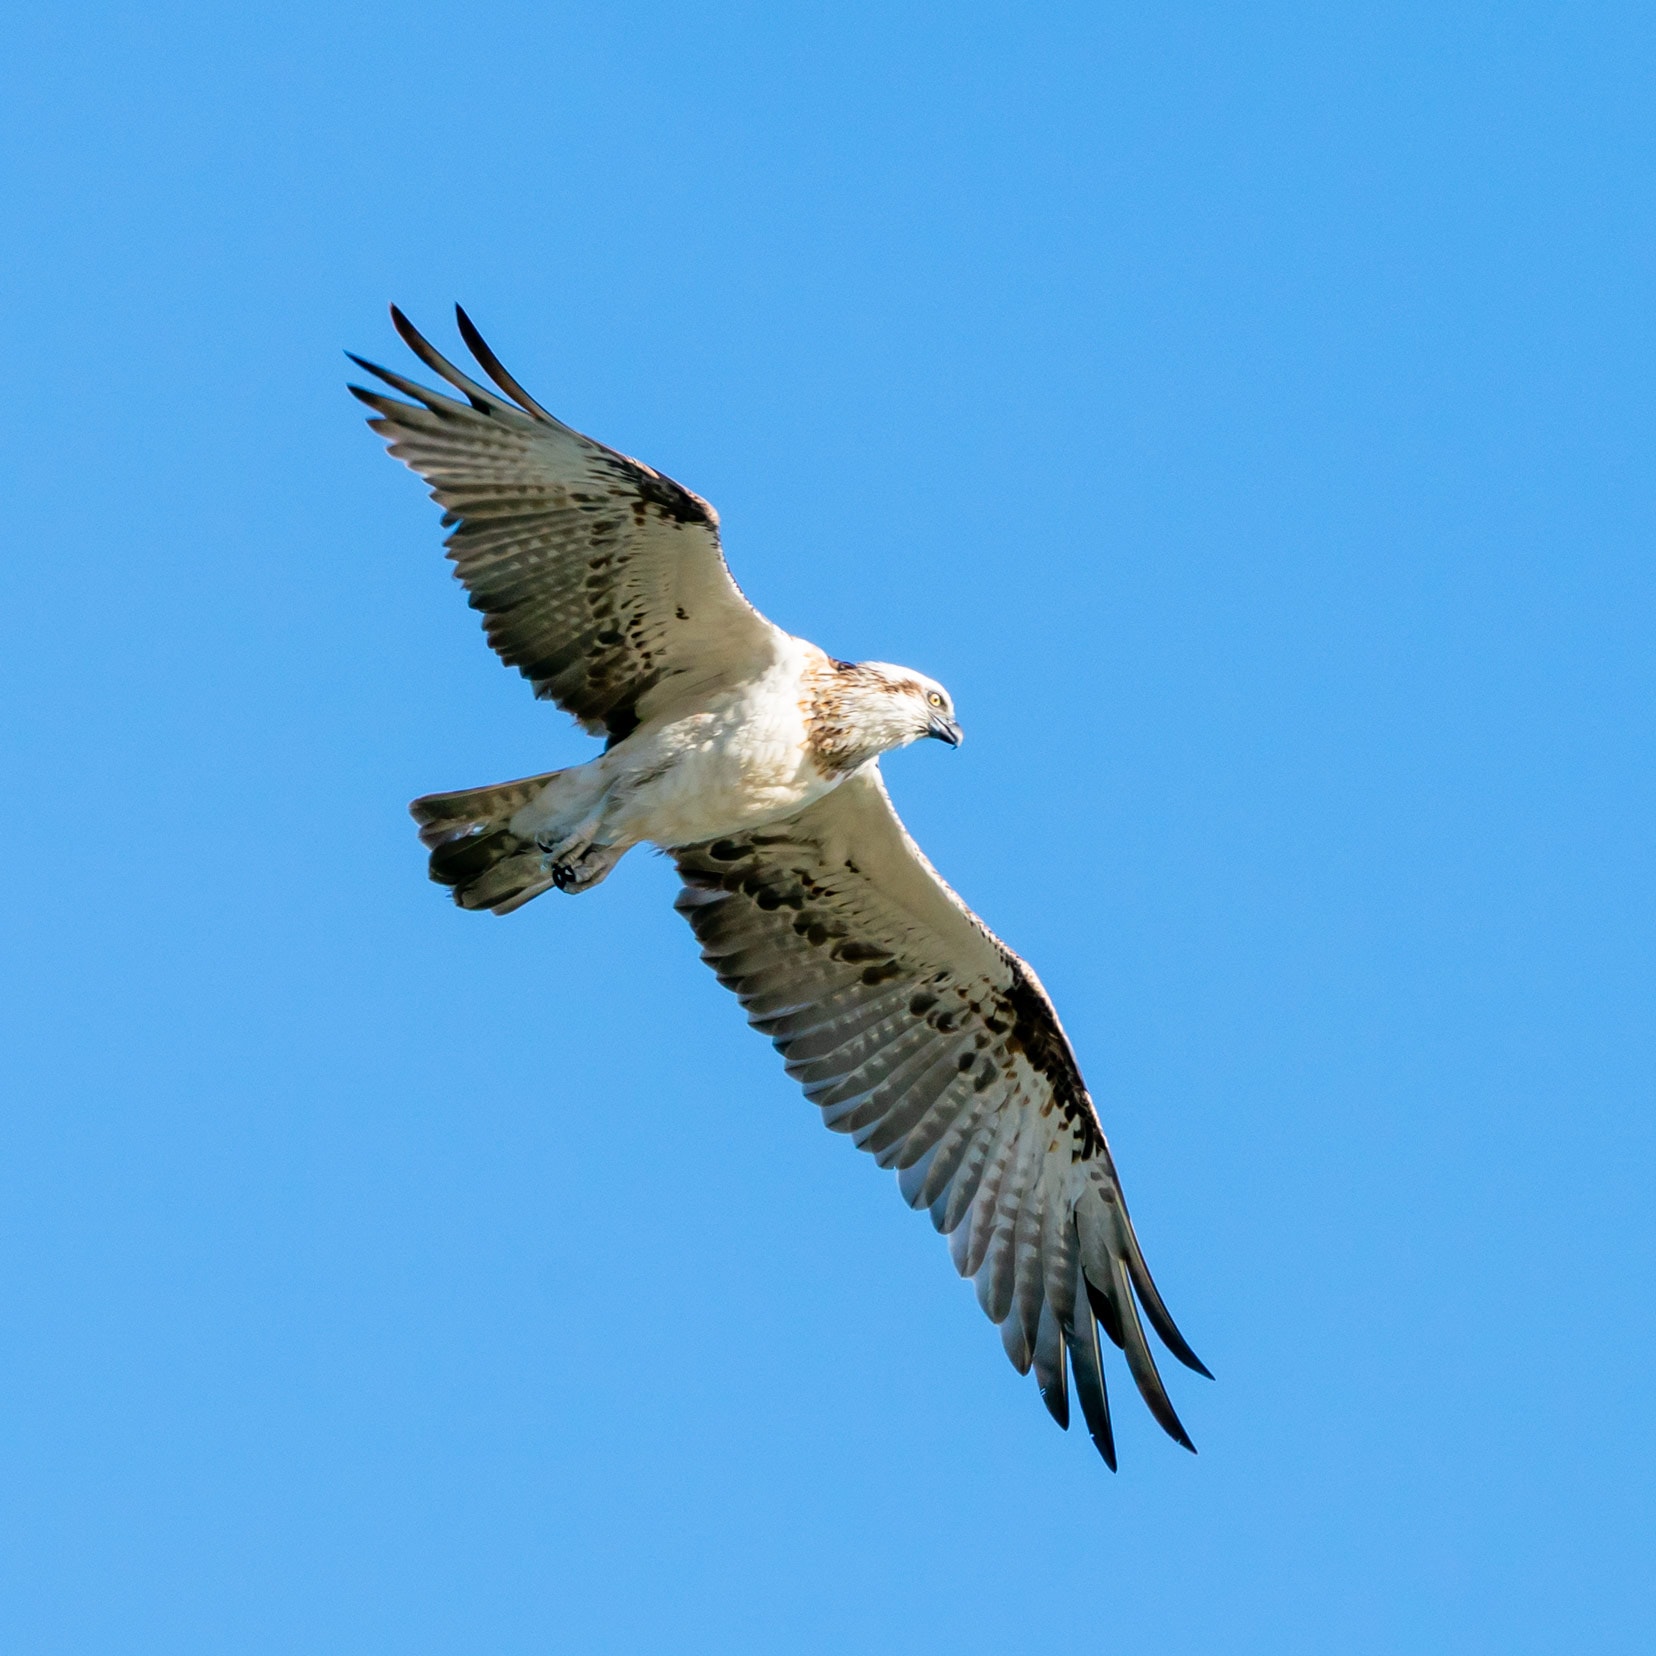 An osprey flying above us as we walked along Knoll drive